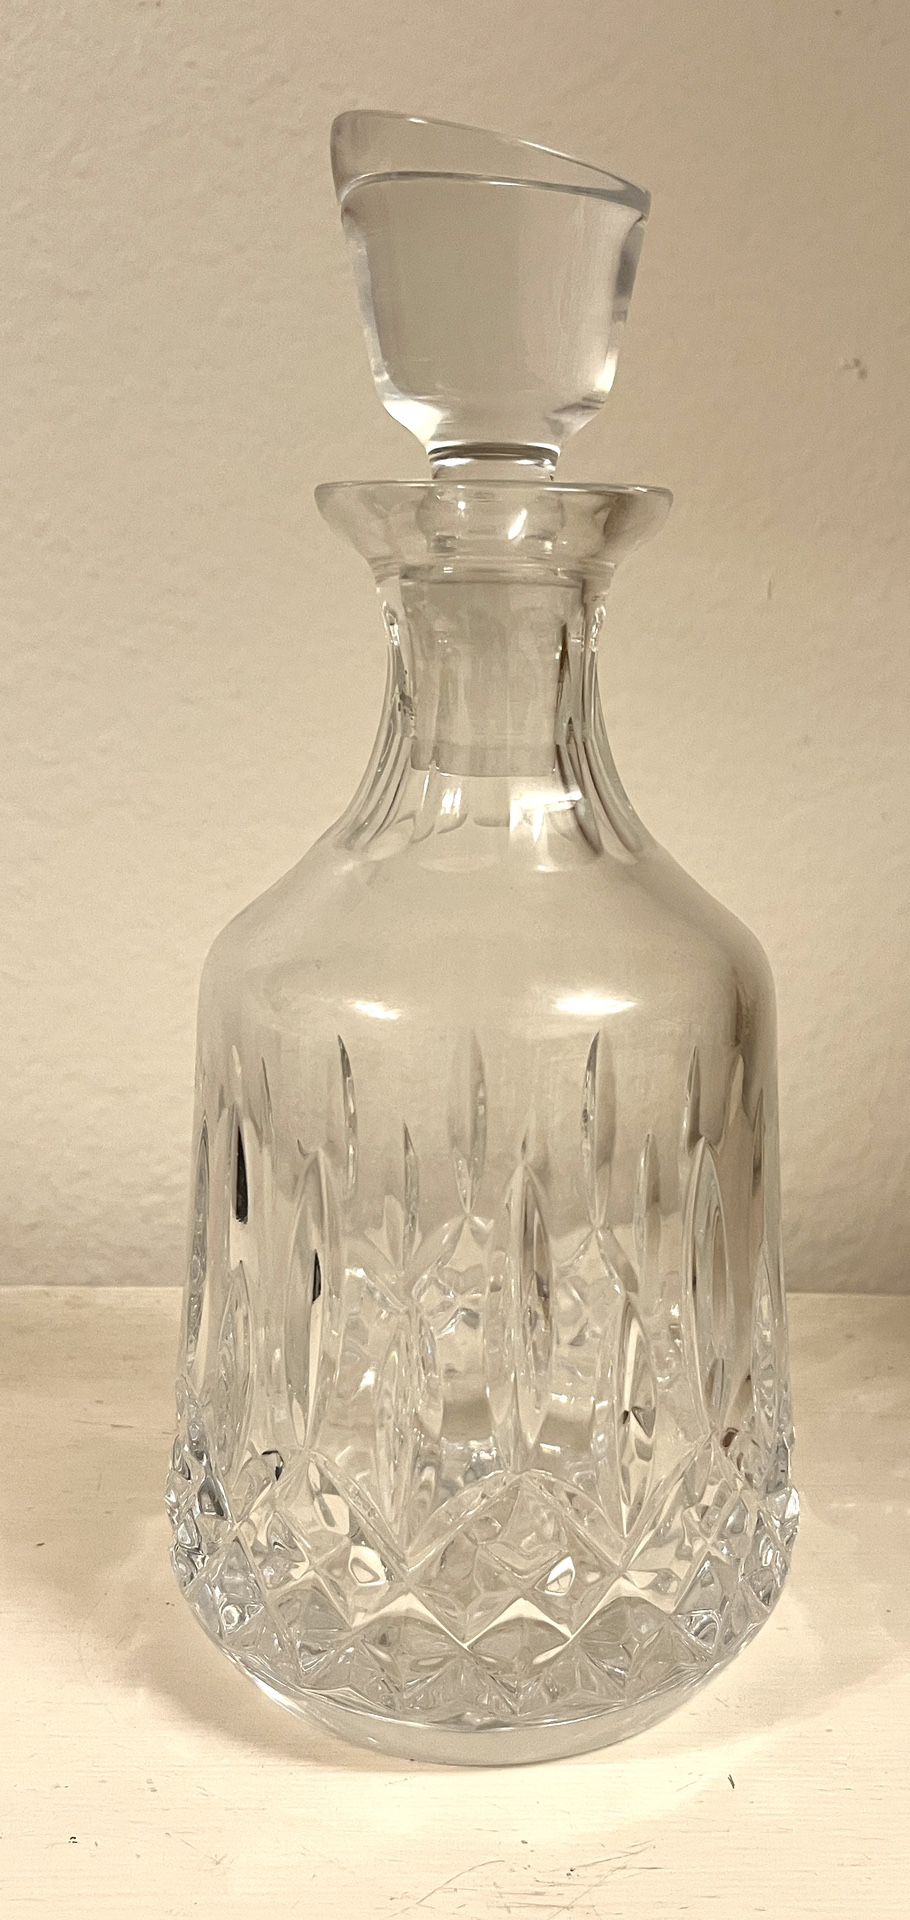 WATERFORD Lismore Decanter. Crystal pattern with signature diamond and wedge cuts. Slant cut on its crystal stopper. 